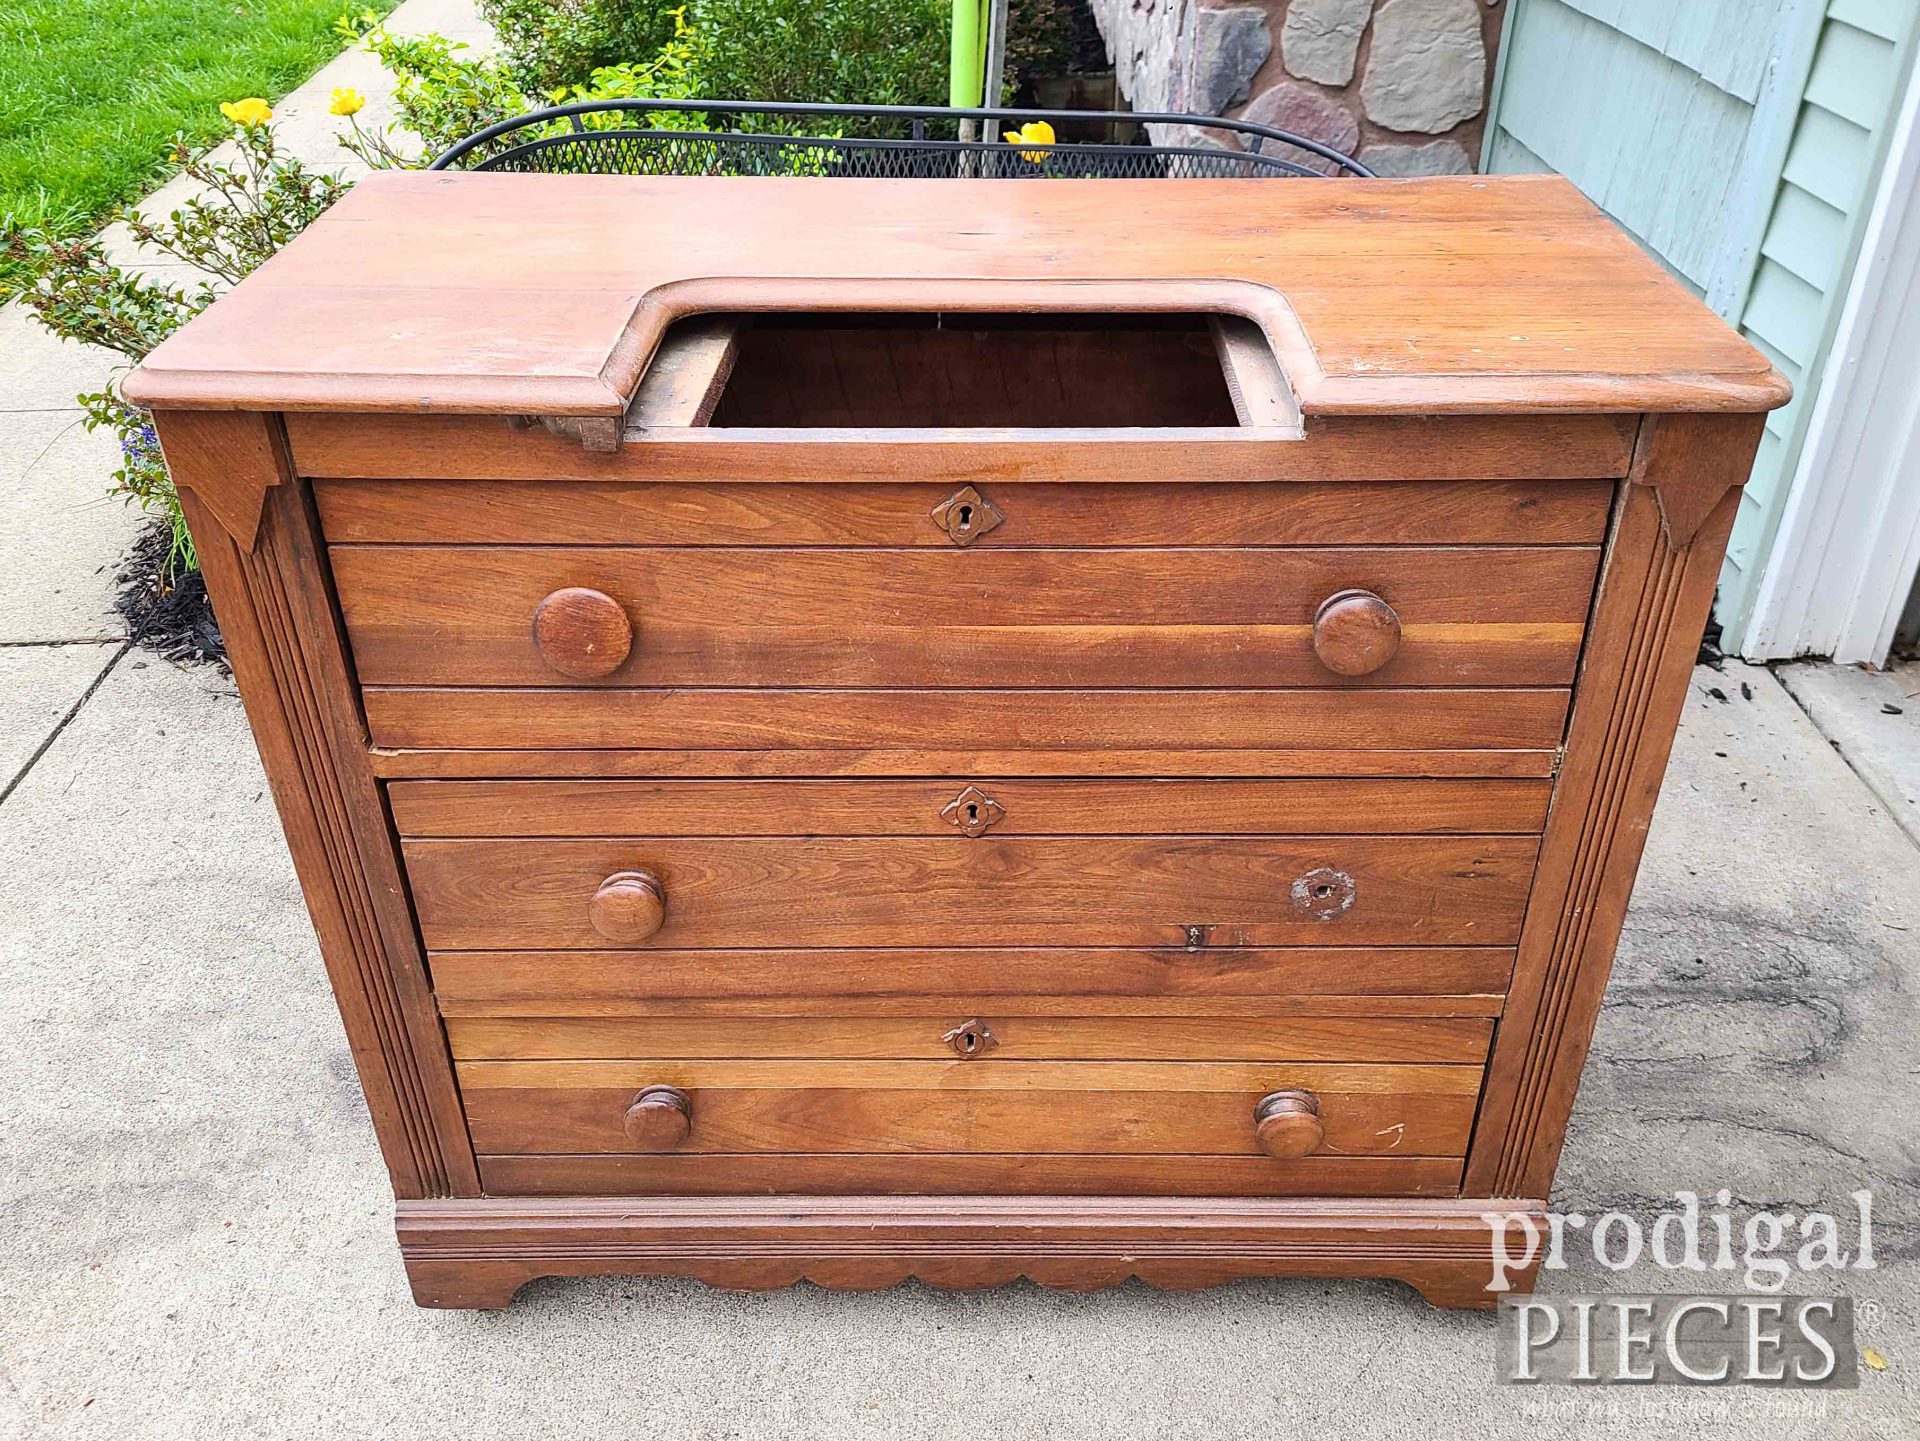 Antique Chest of Drawers Before | prodigalpieces.com